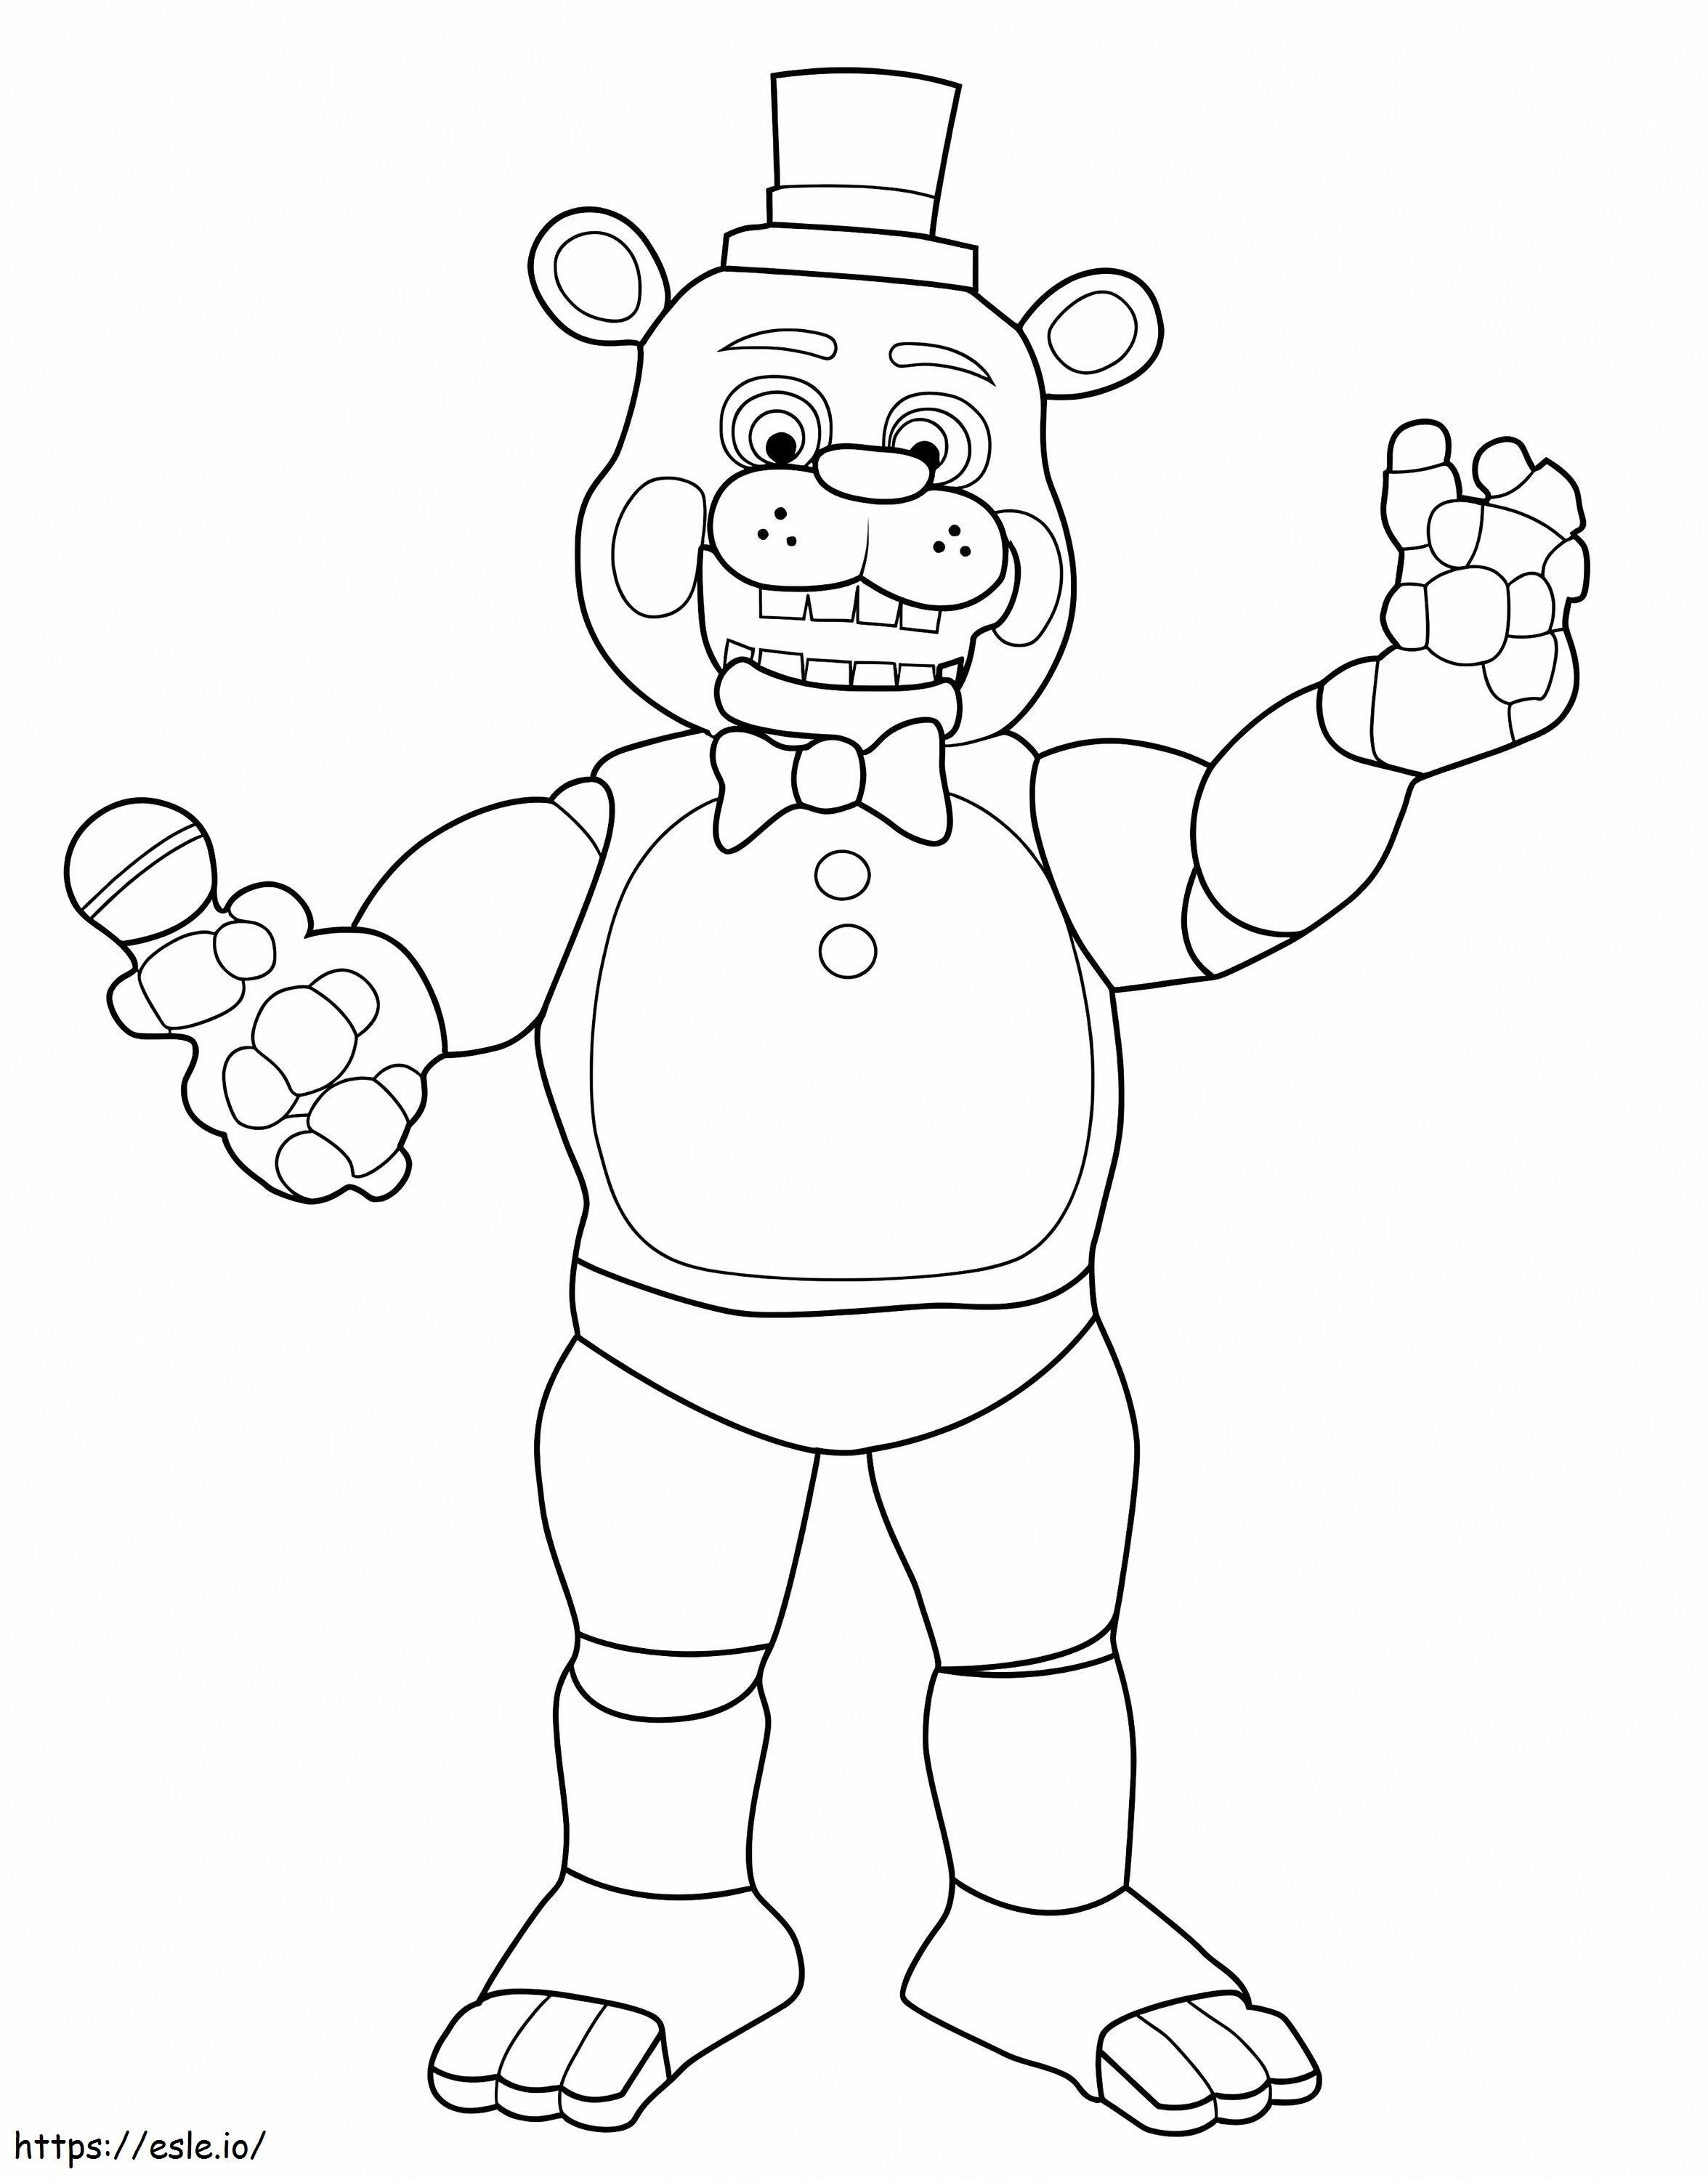 Toy Freddy FNAF coloring page